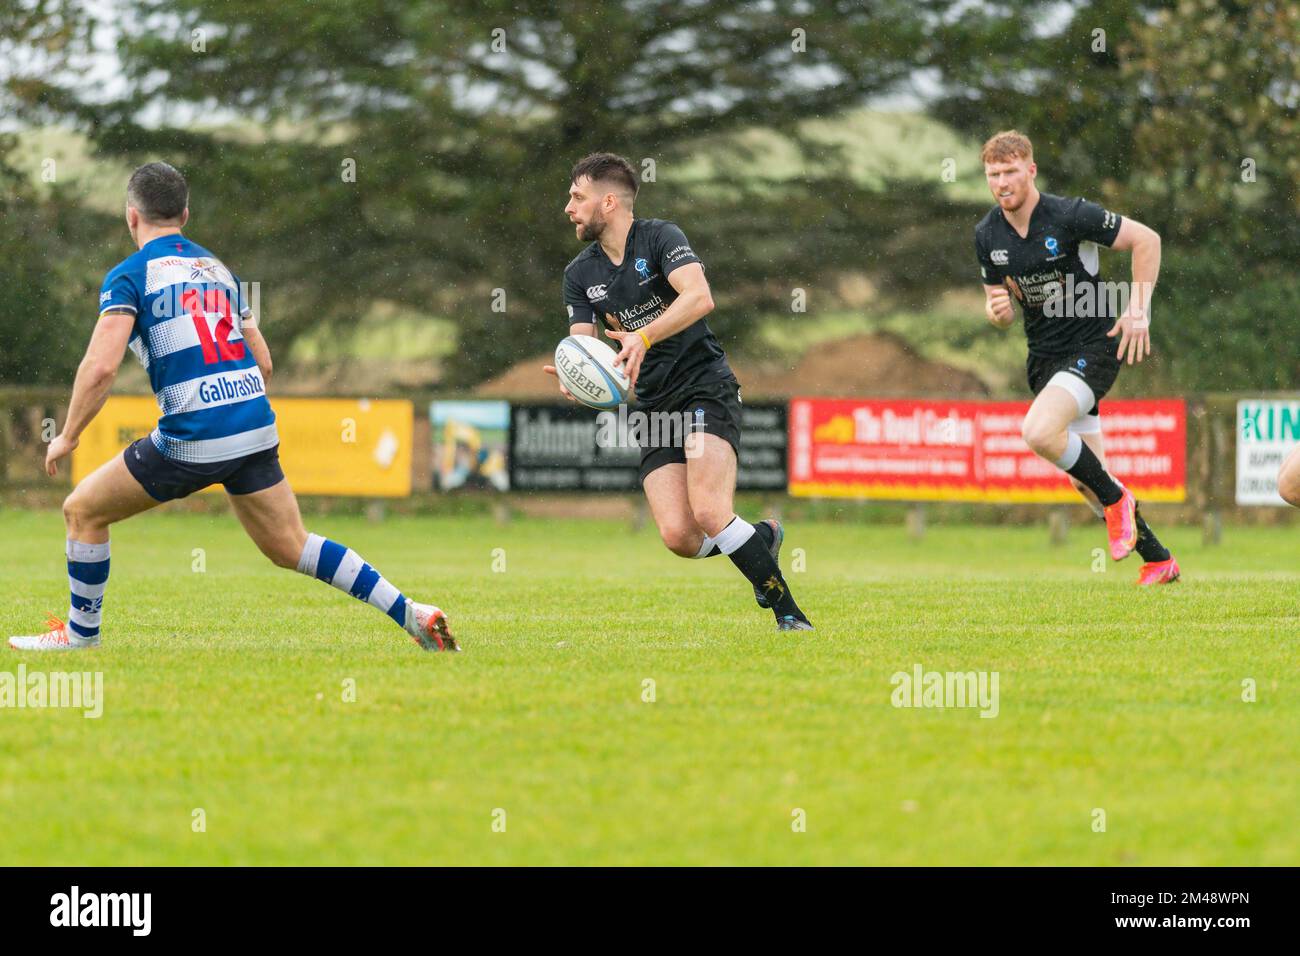 Berwick player runs with the ball in both hands advancing towards an opponent at the Berwick rugby club versus Howe of Fife rugby club mens match Stock Photo